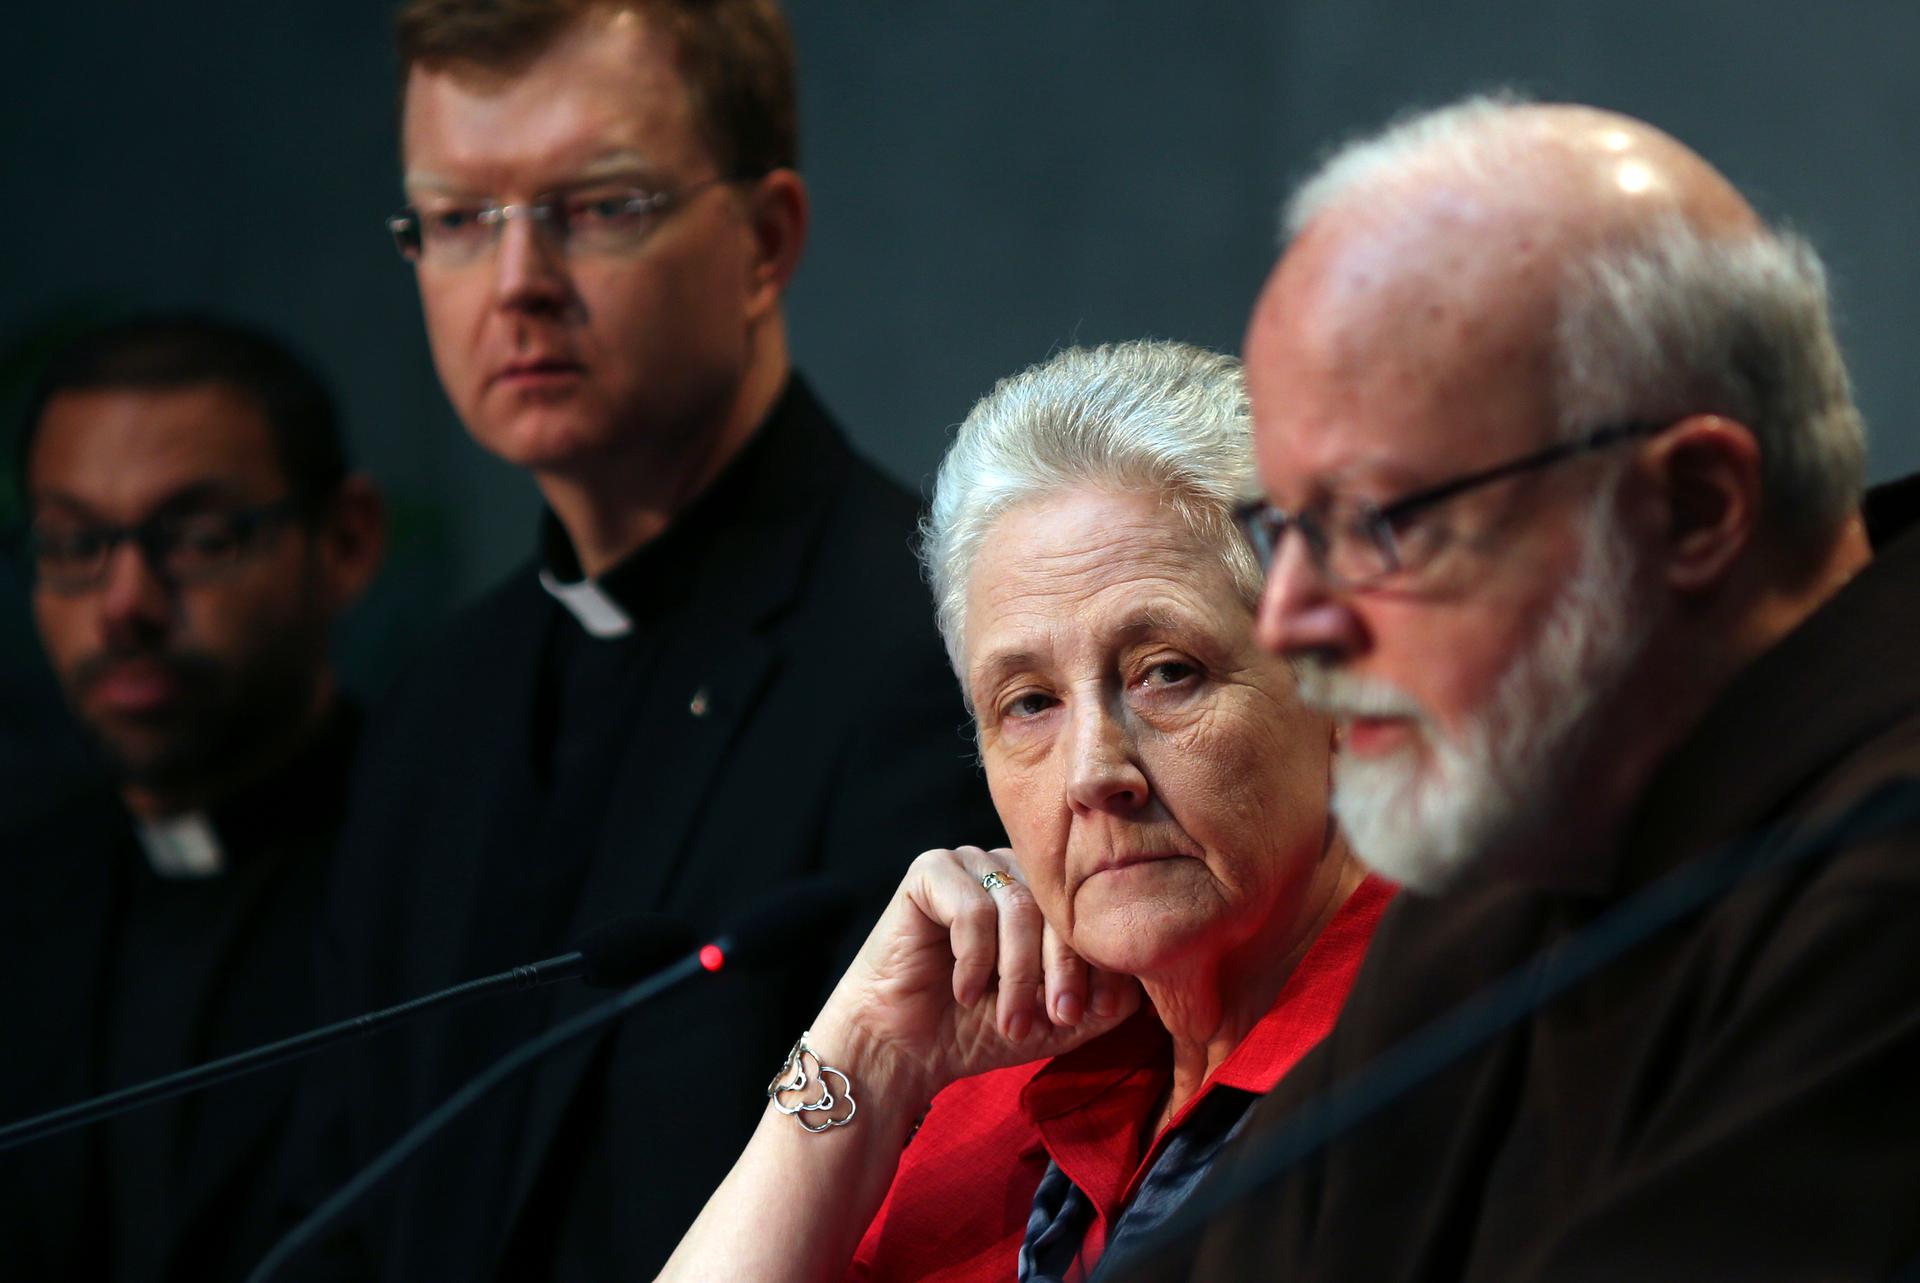 Marie Collins (2nd from right), who served as a memer of the Pontifical Commission for the Protection of Minors, watches as Cardinal Sean Patrick O'Malley (right) speaks during their briefing at the Holy See’s press office at the Vatican in Rome on May 3,